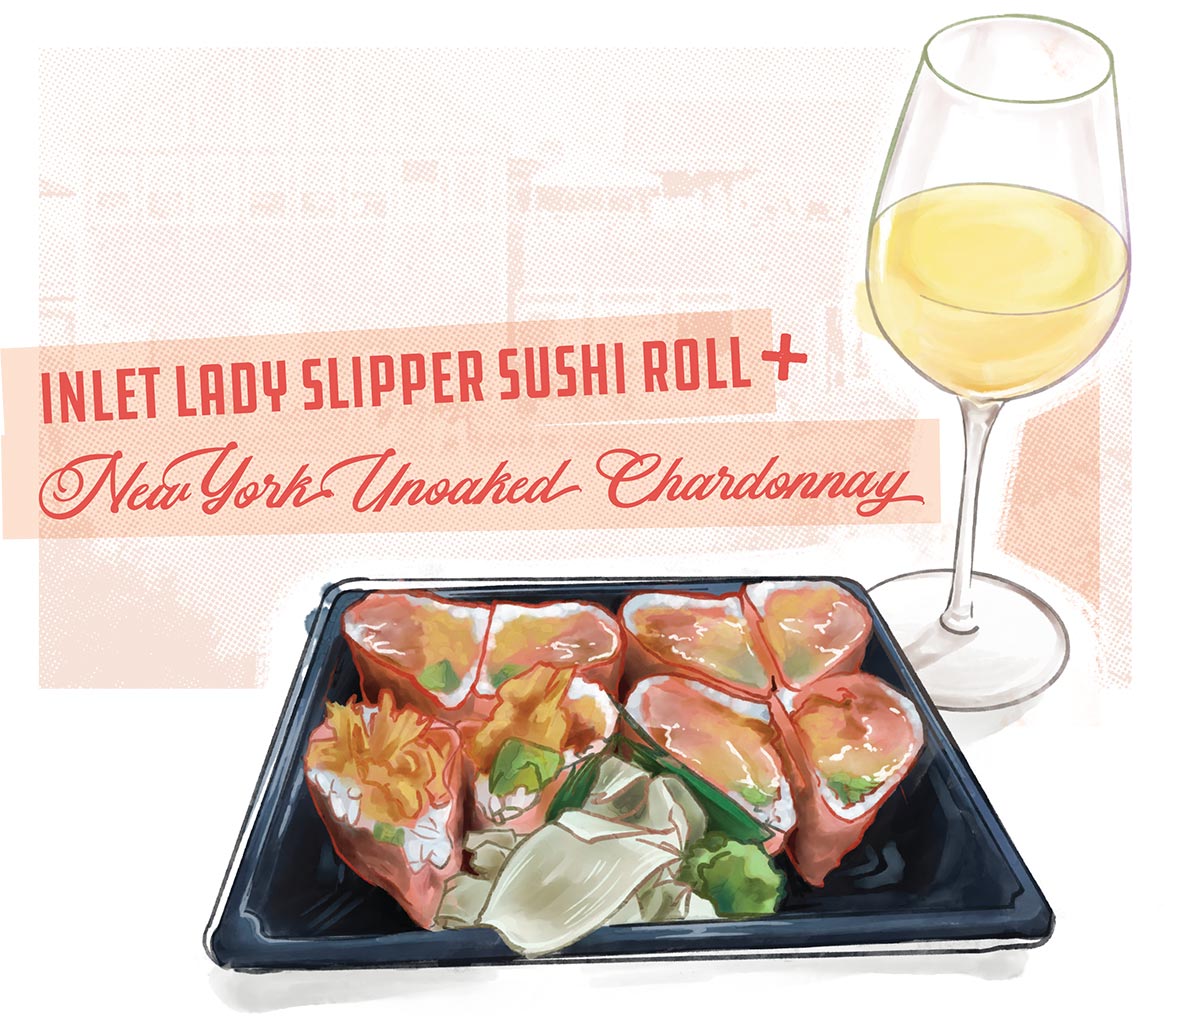 Illustration by Brittany Norris of Inlet Lady Slipper Sushi Roll + New York Unoaked Chardonnay